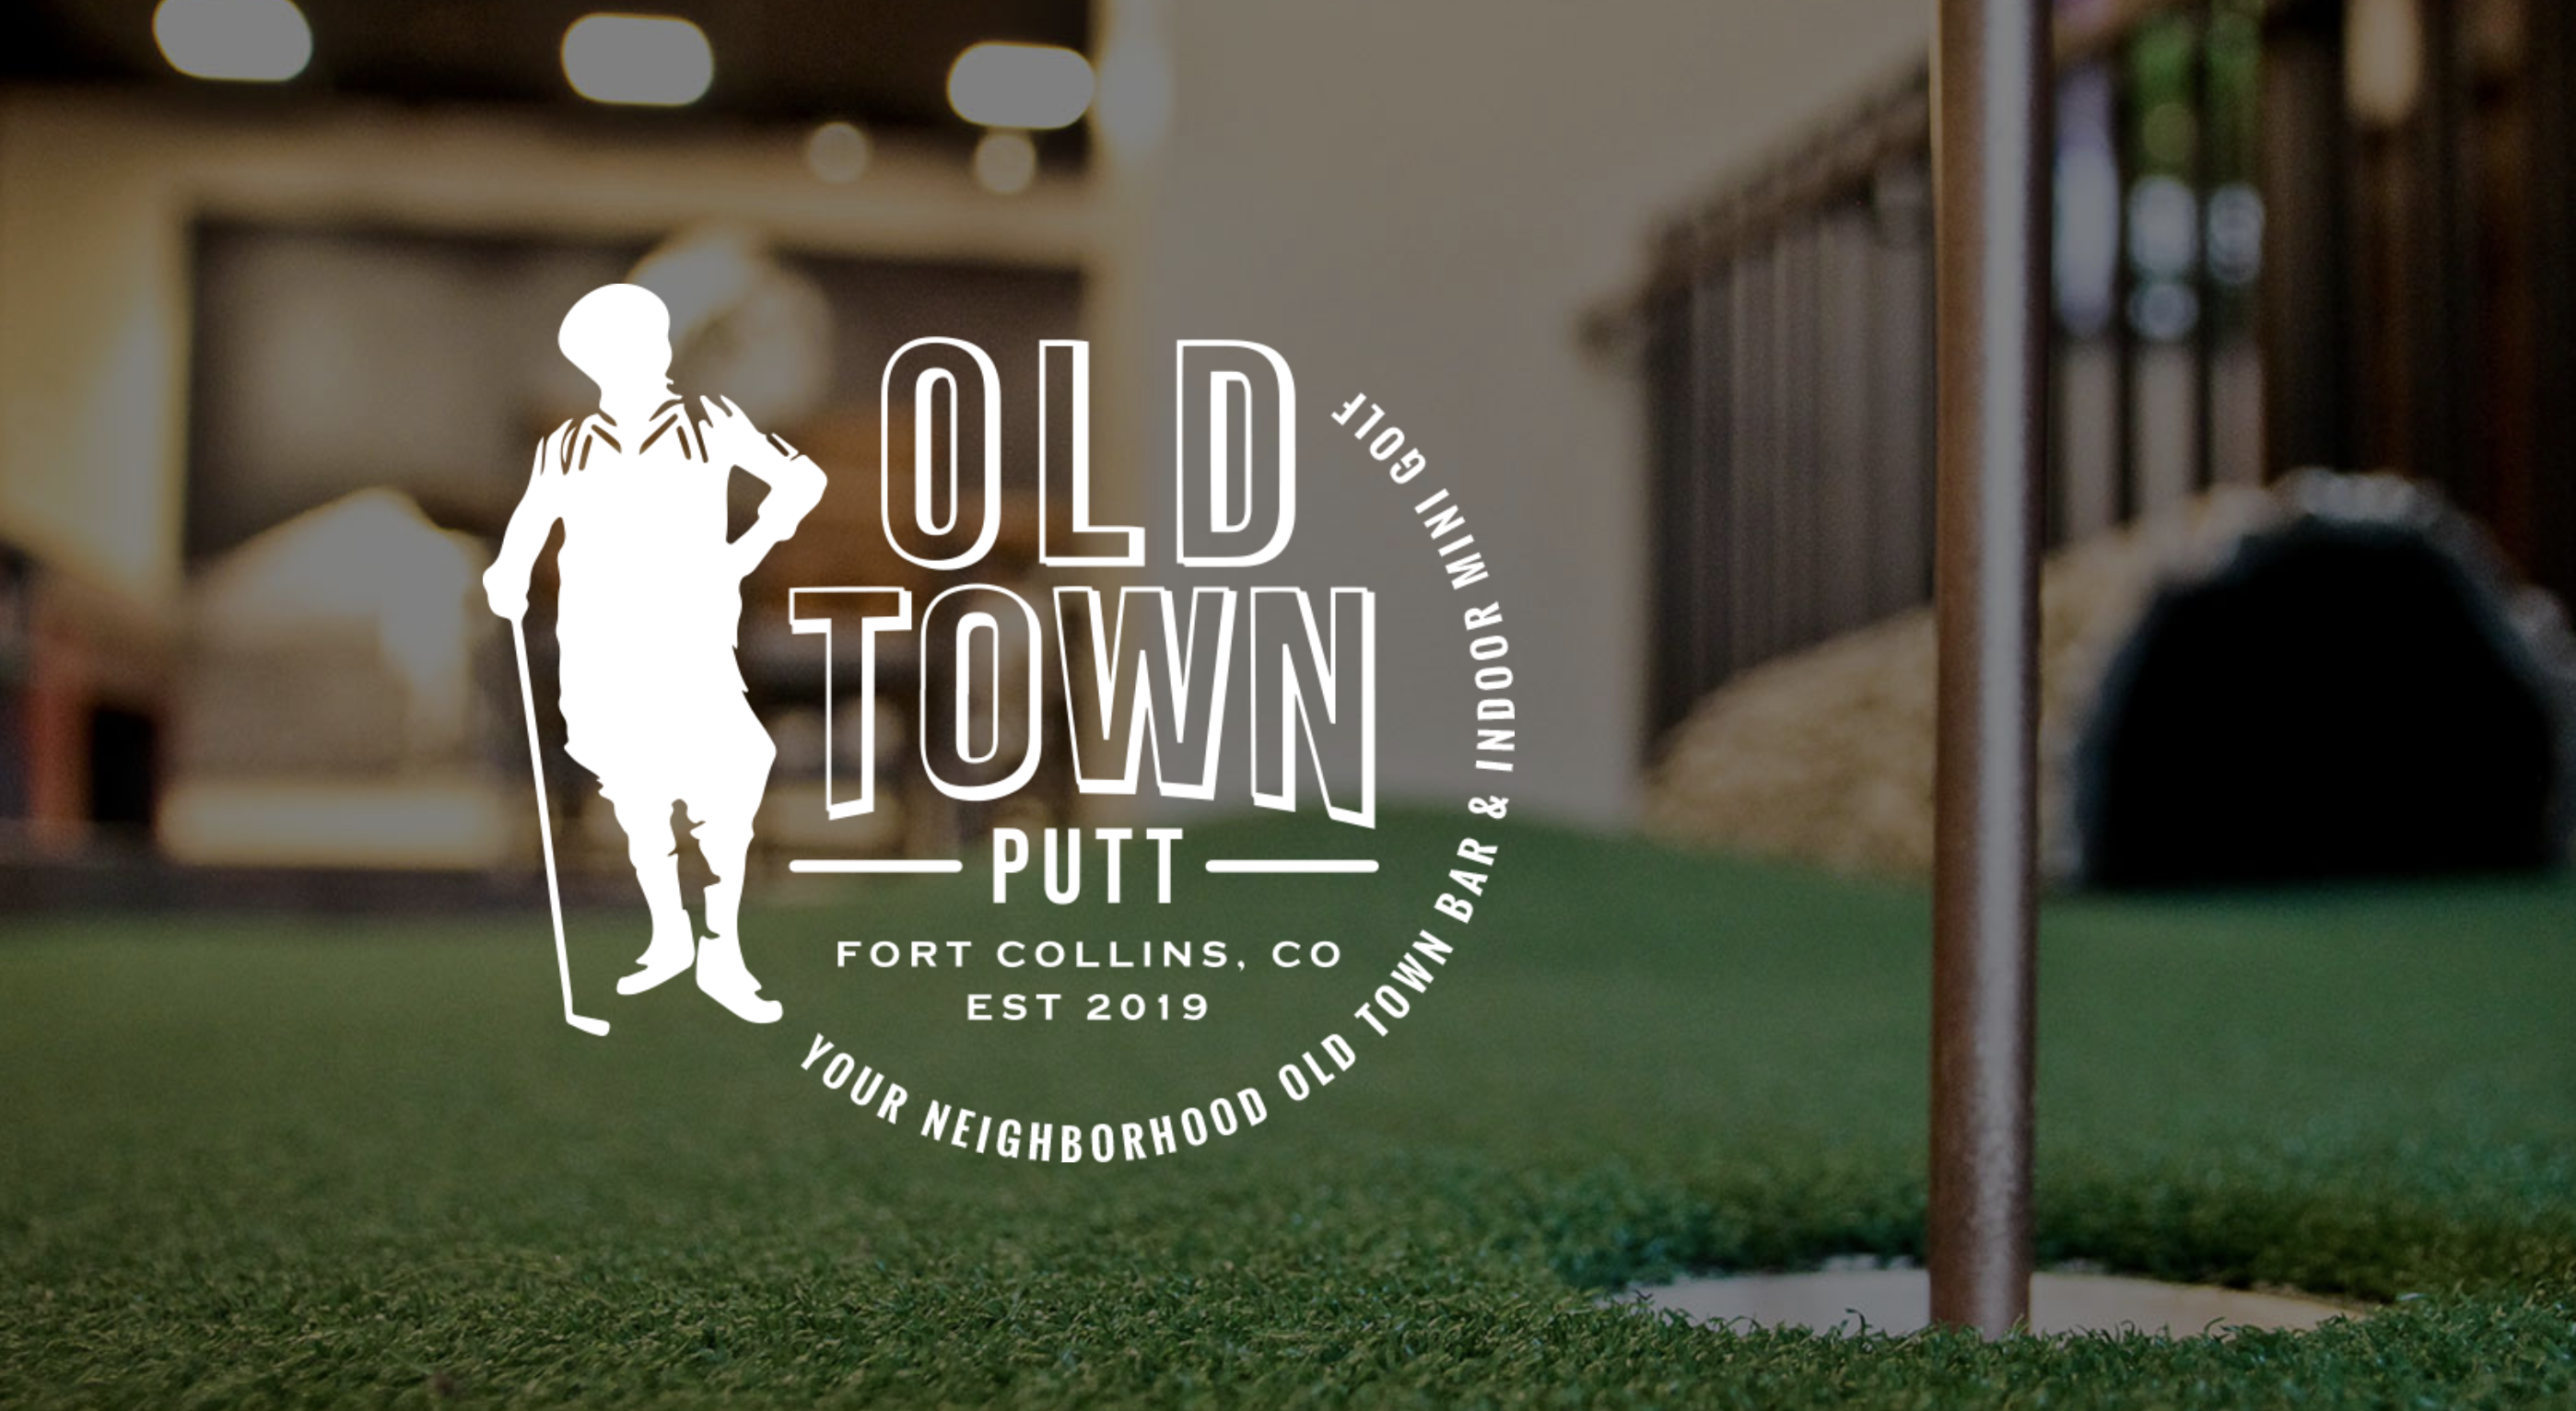 Old Town Putt